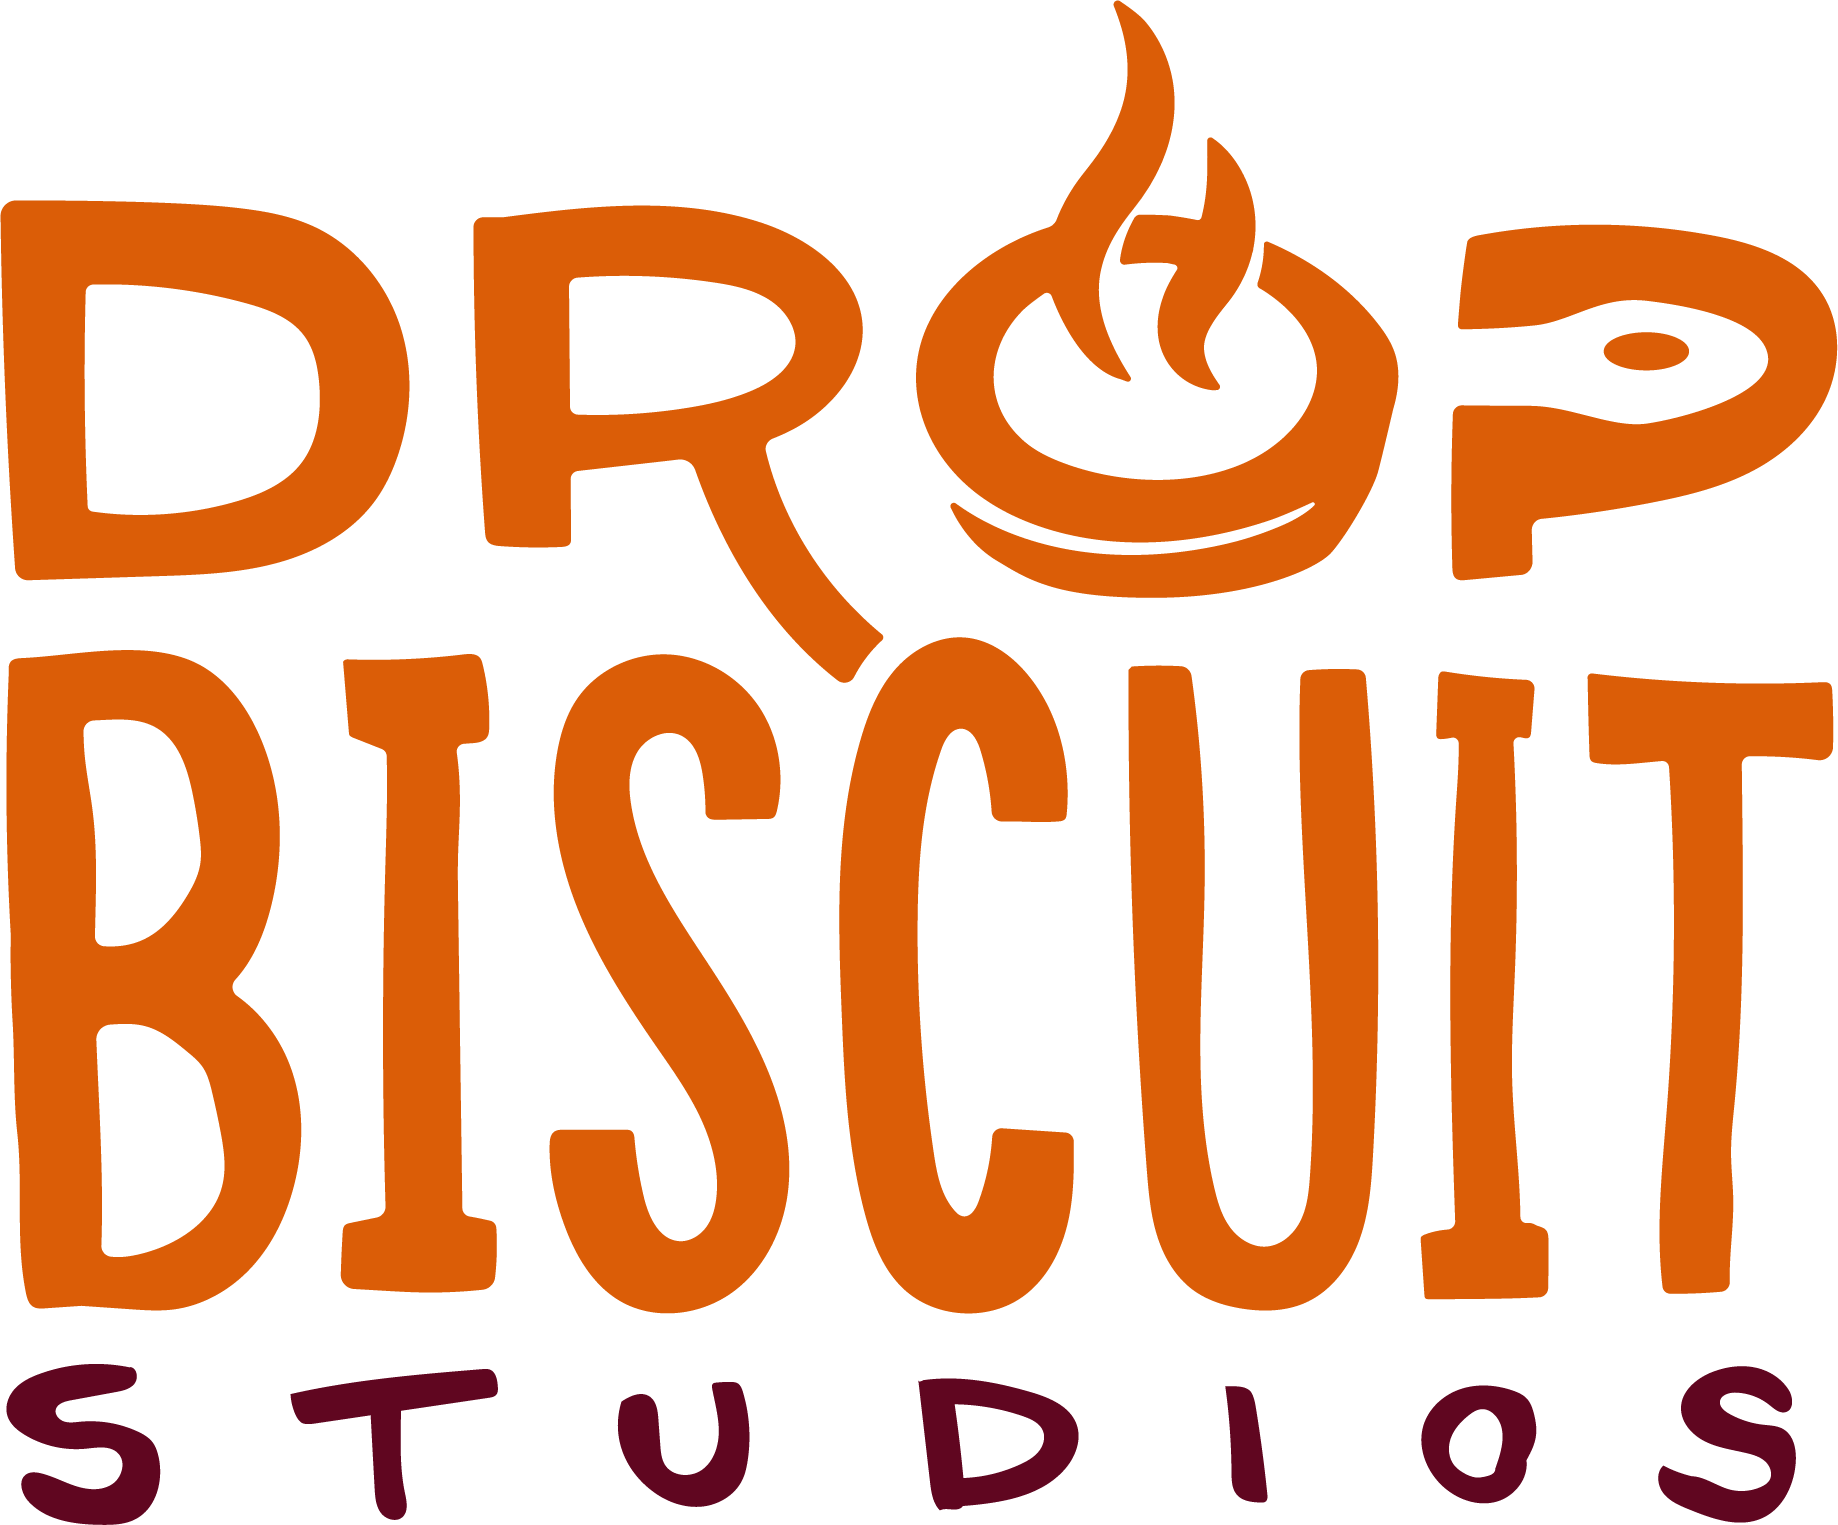 Guaranty Media and Mike Agovino Announce Joint Podcast Venture, Drop Biscuit Studios